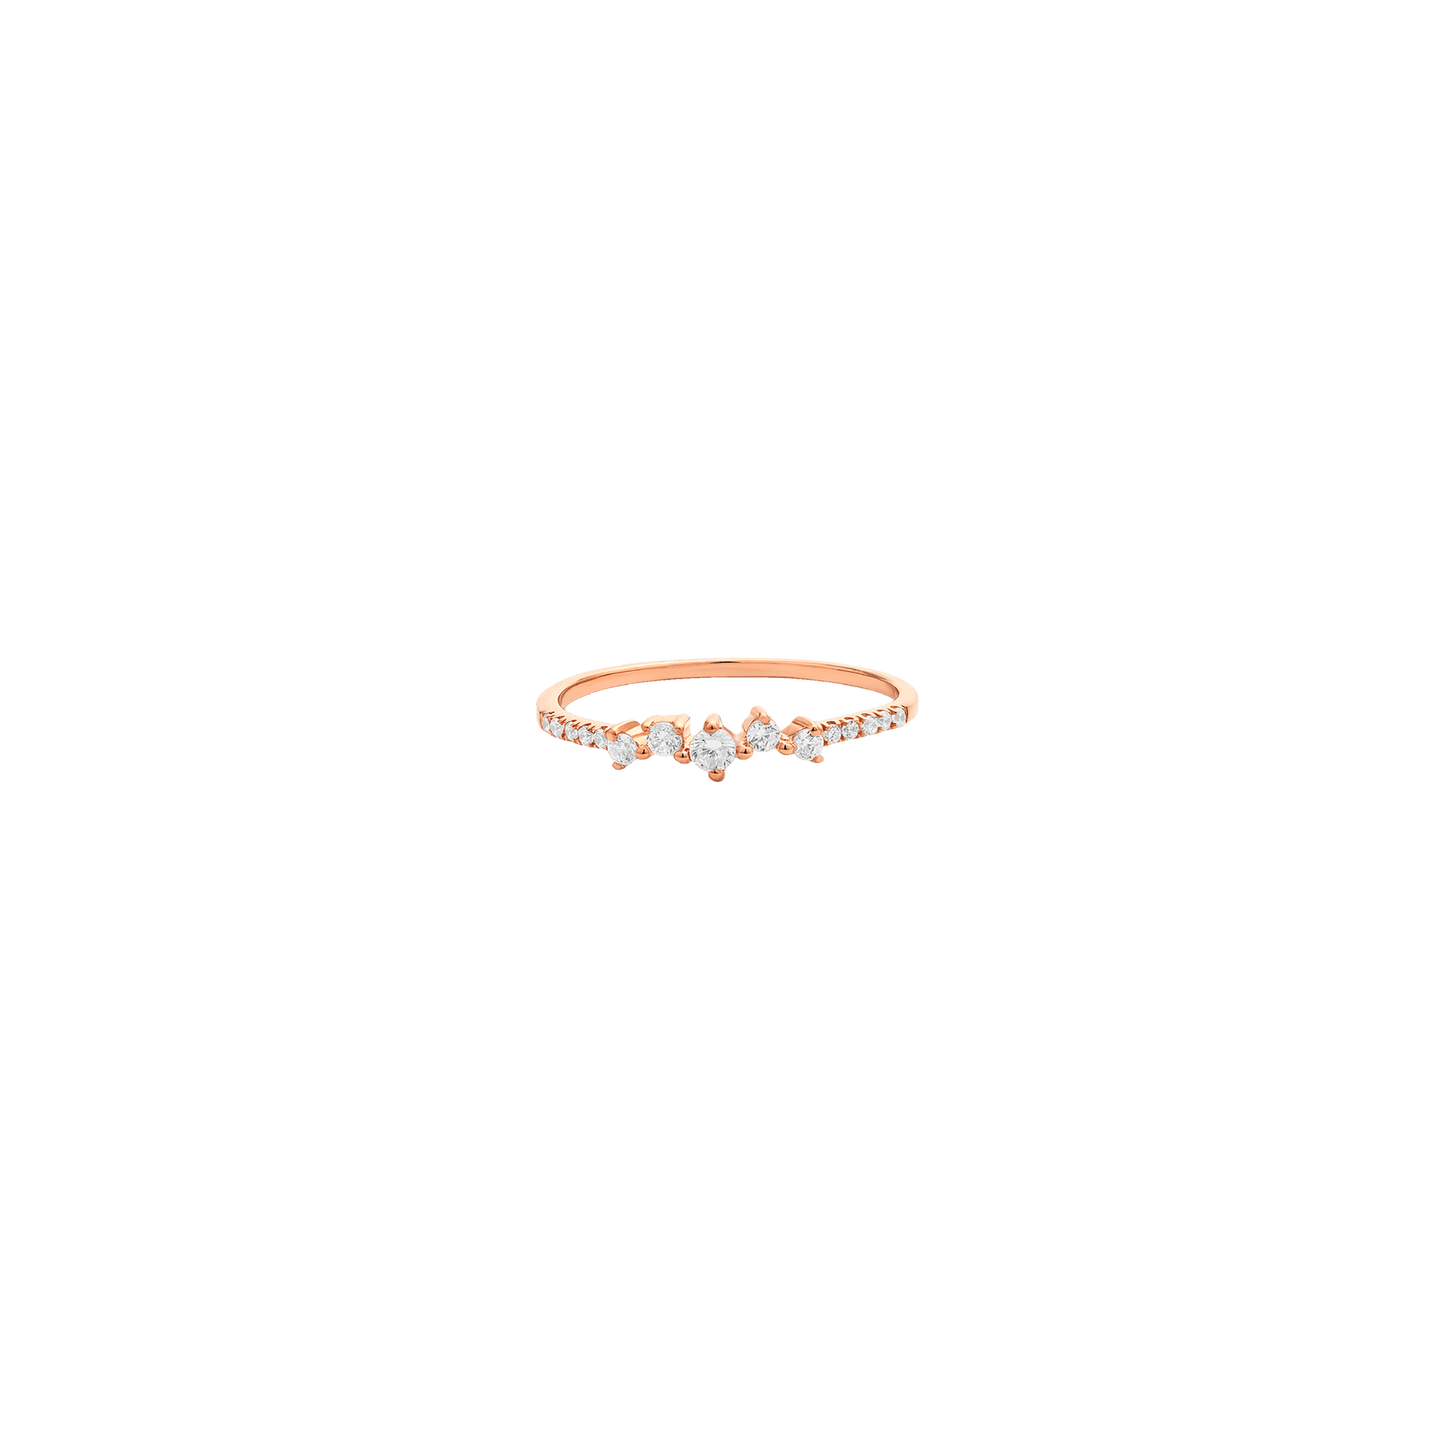 Cluster Diamond Ring - 14K Yellow Gold Rings 14K Solid Gold 